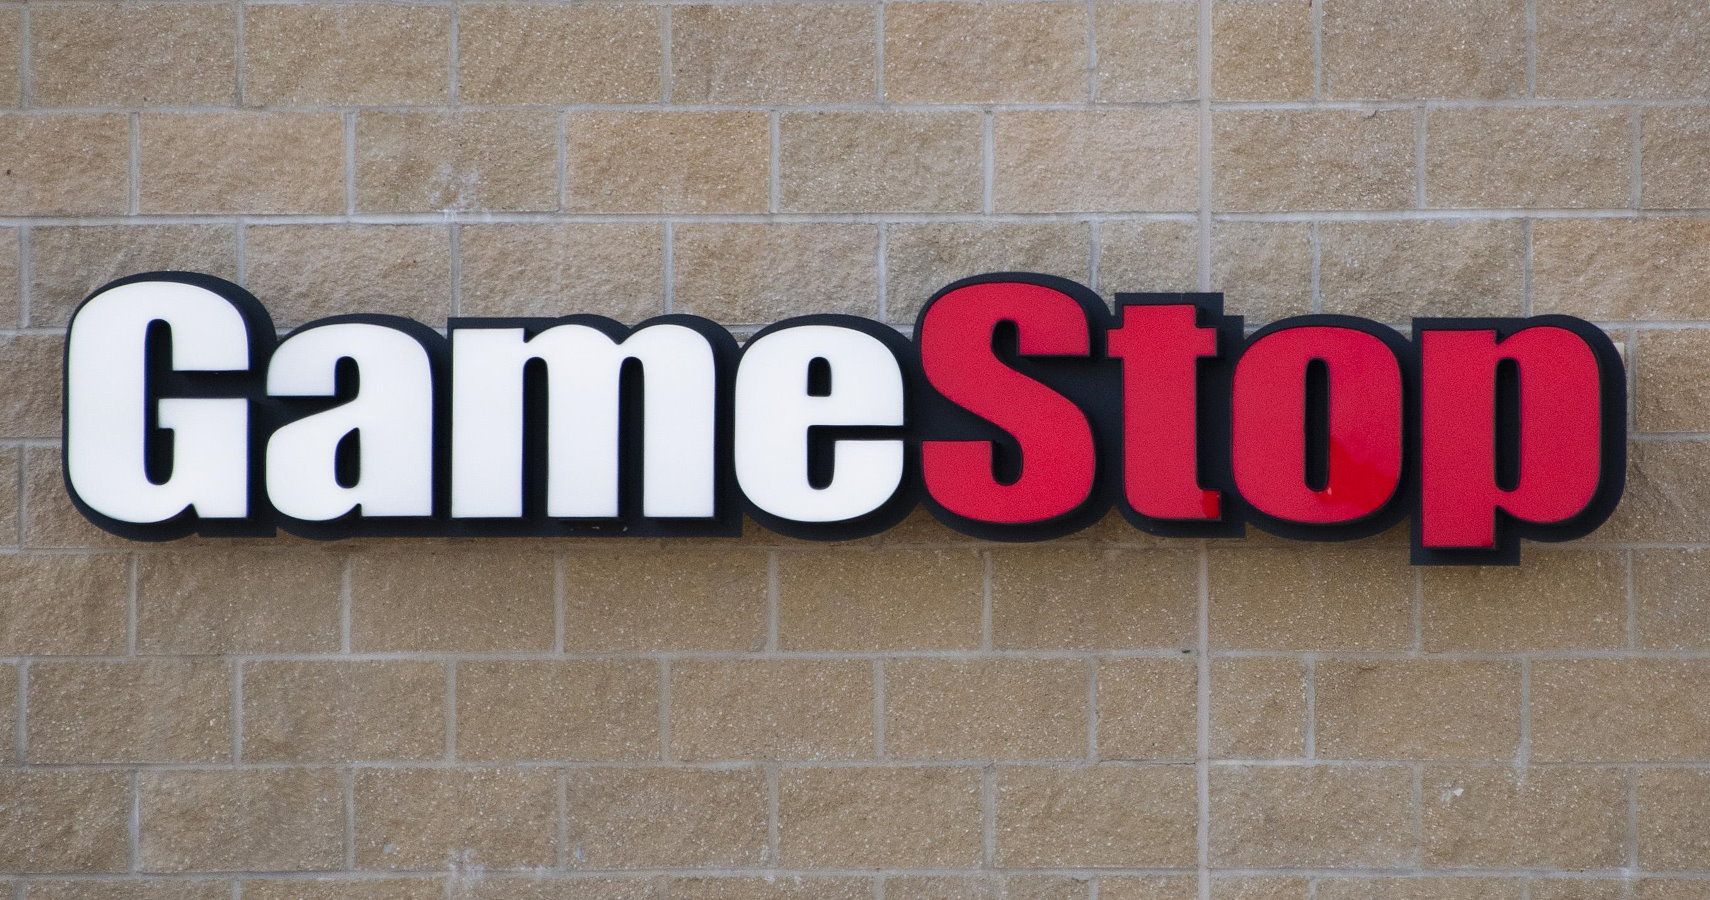 Gamestop Stock Continues To Plummet, Will Be Closing 200 Stores